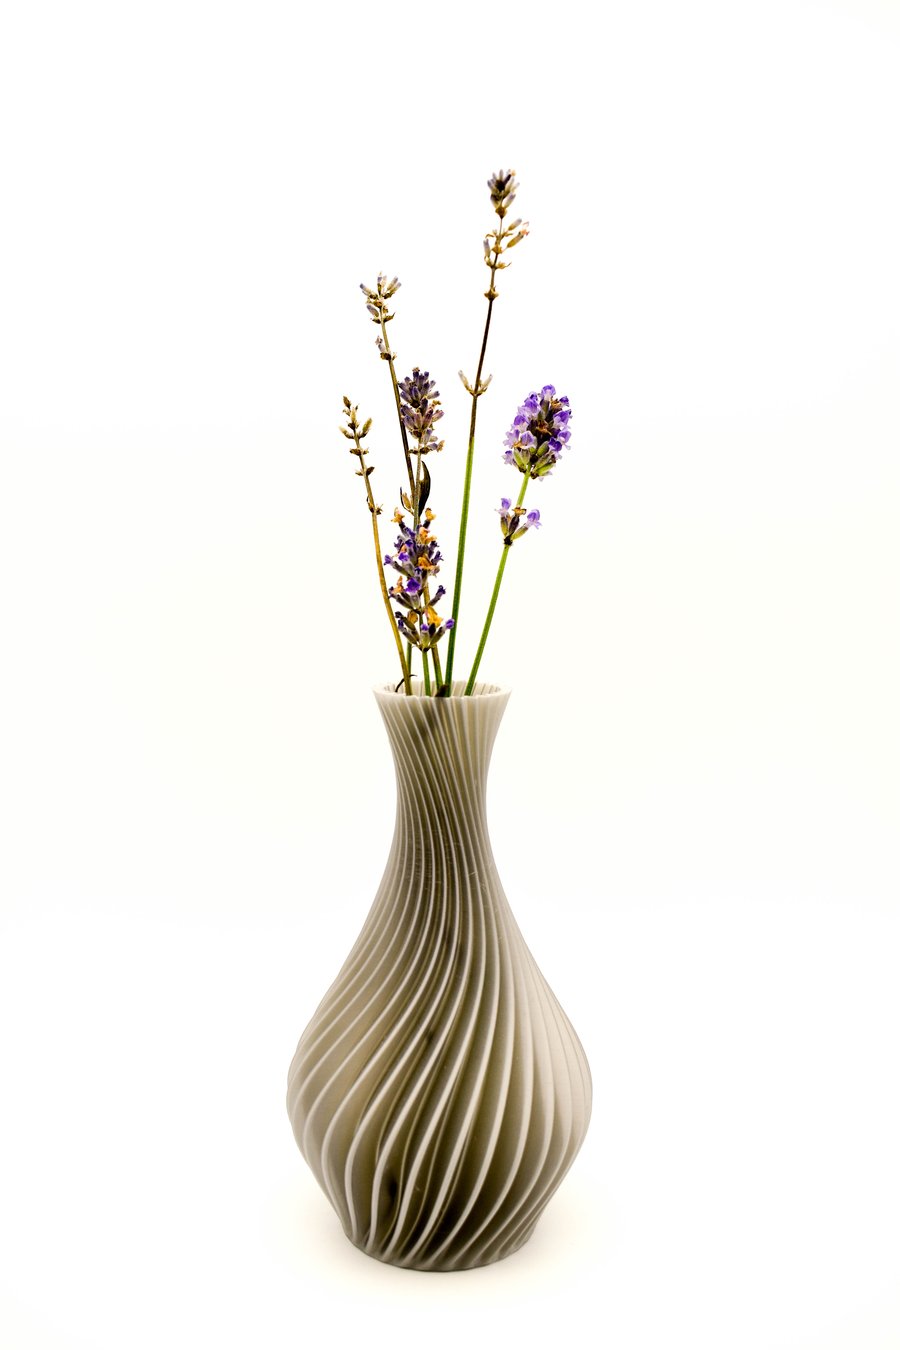 SOLD - 3D Printed bud vase - small silver grey